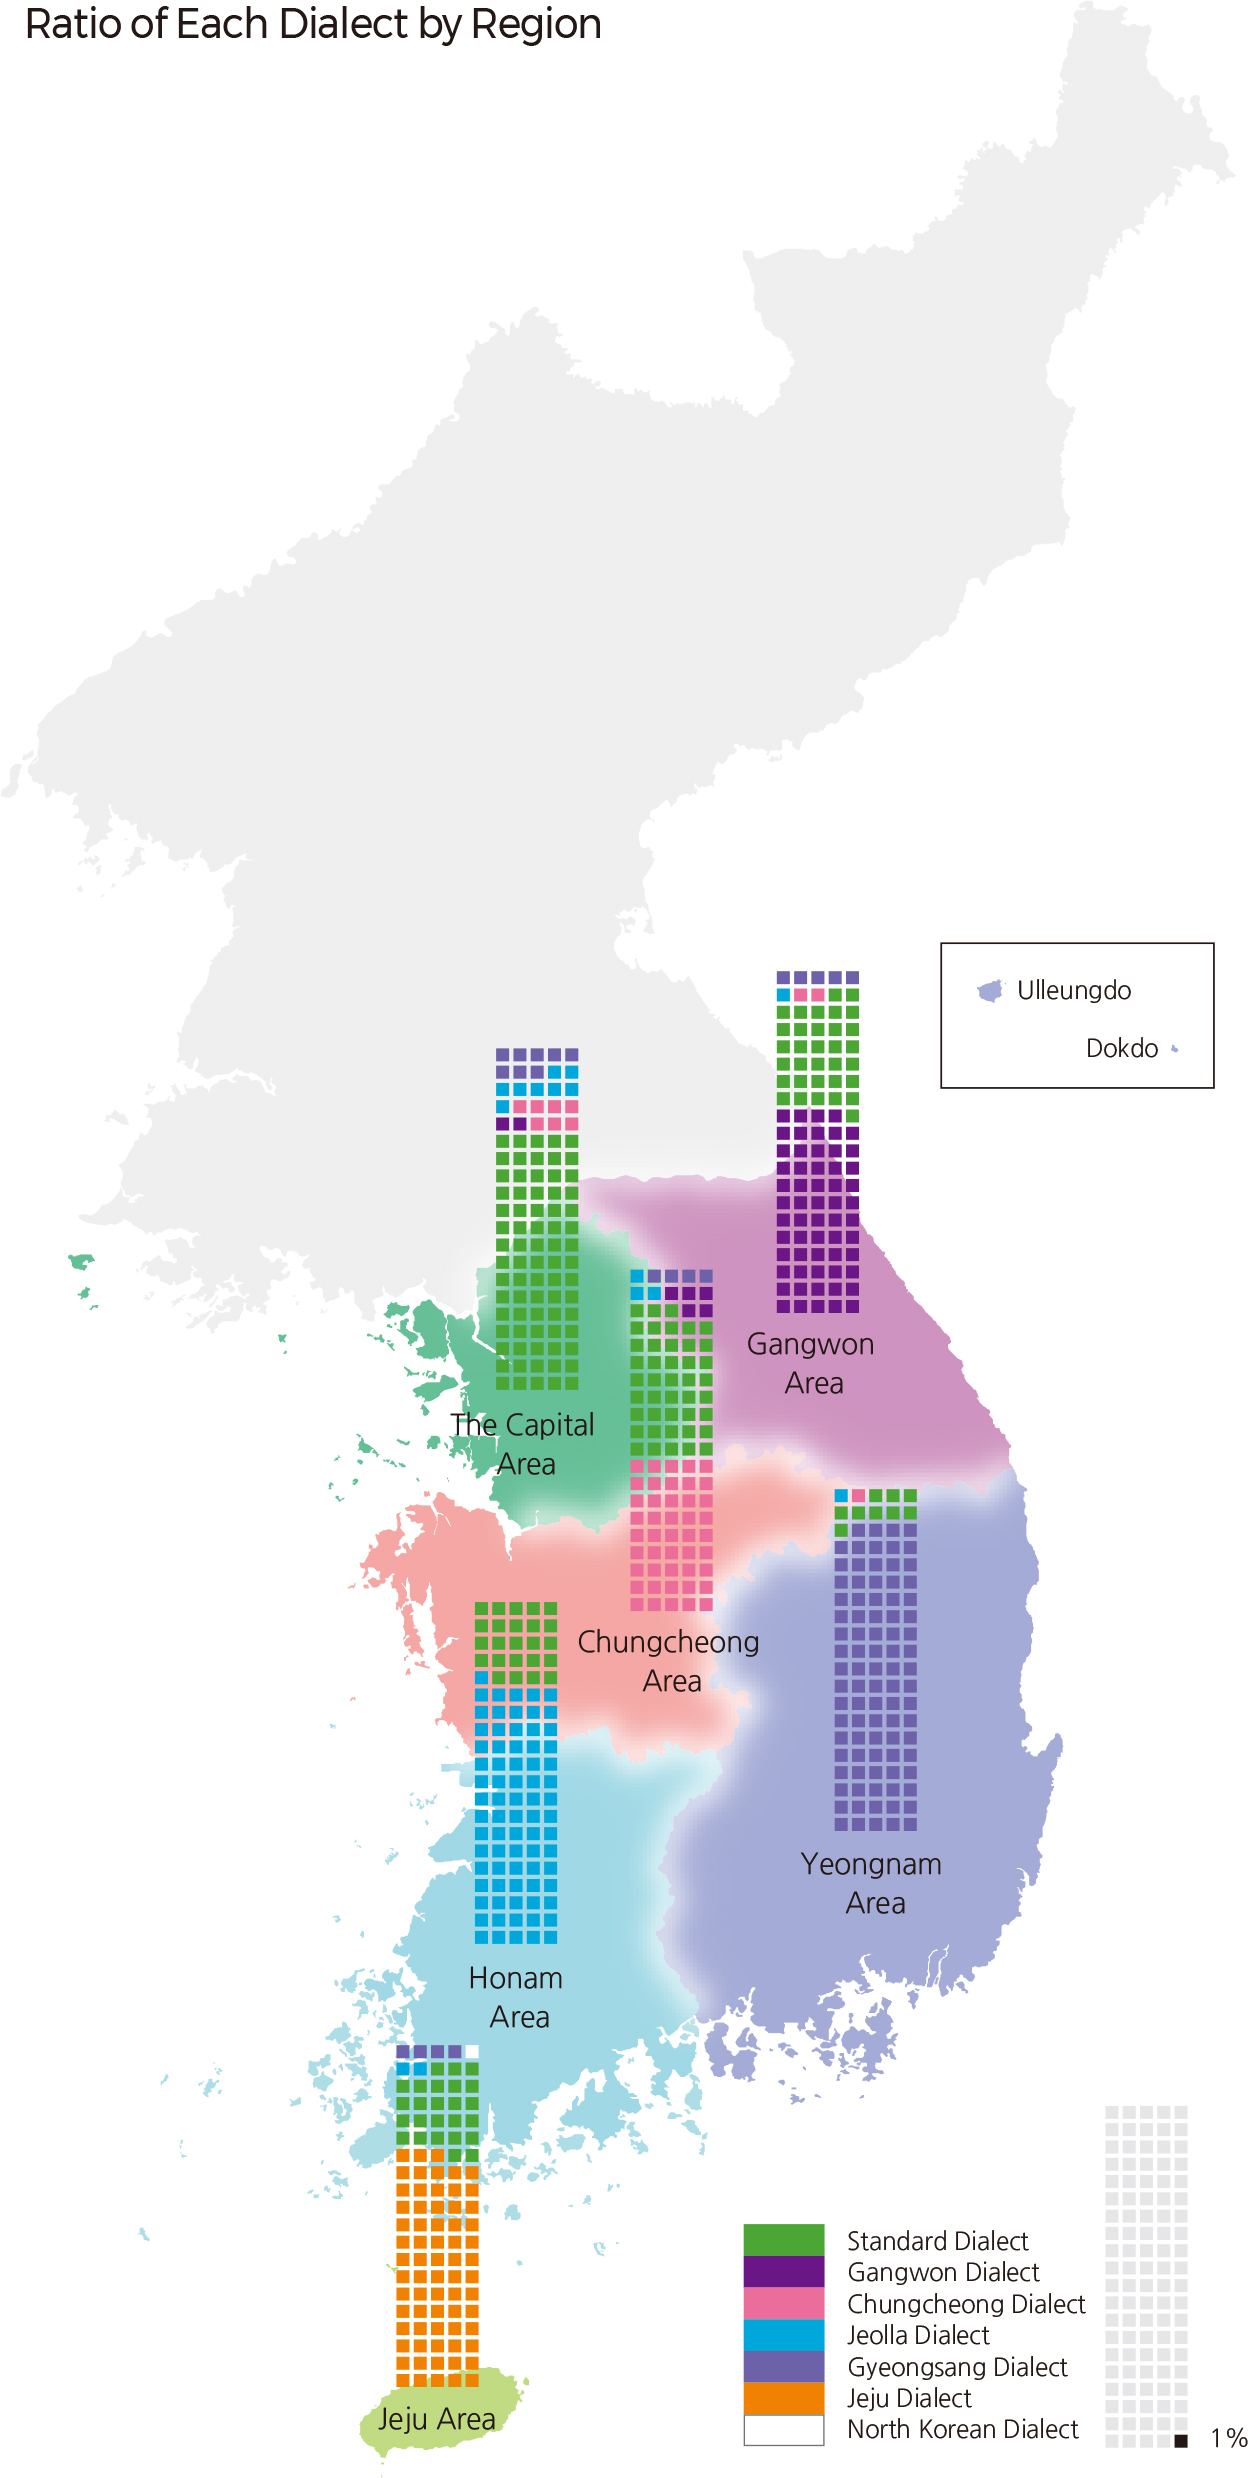 Ratio of Each Dialect by Region